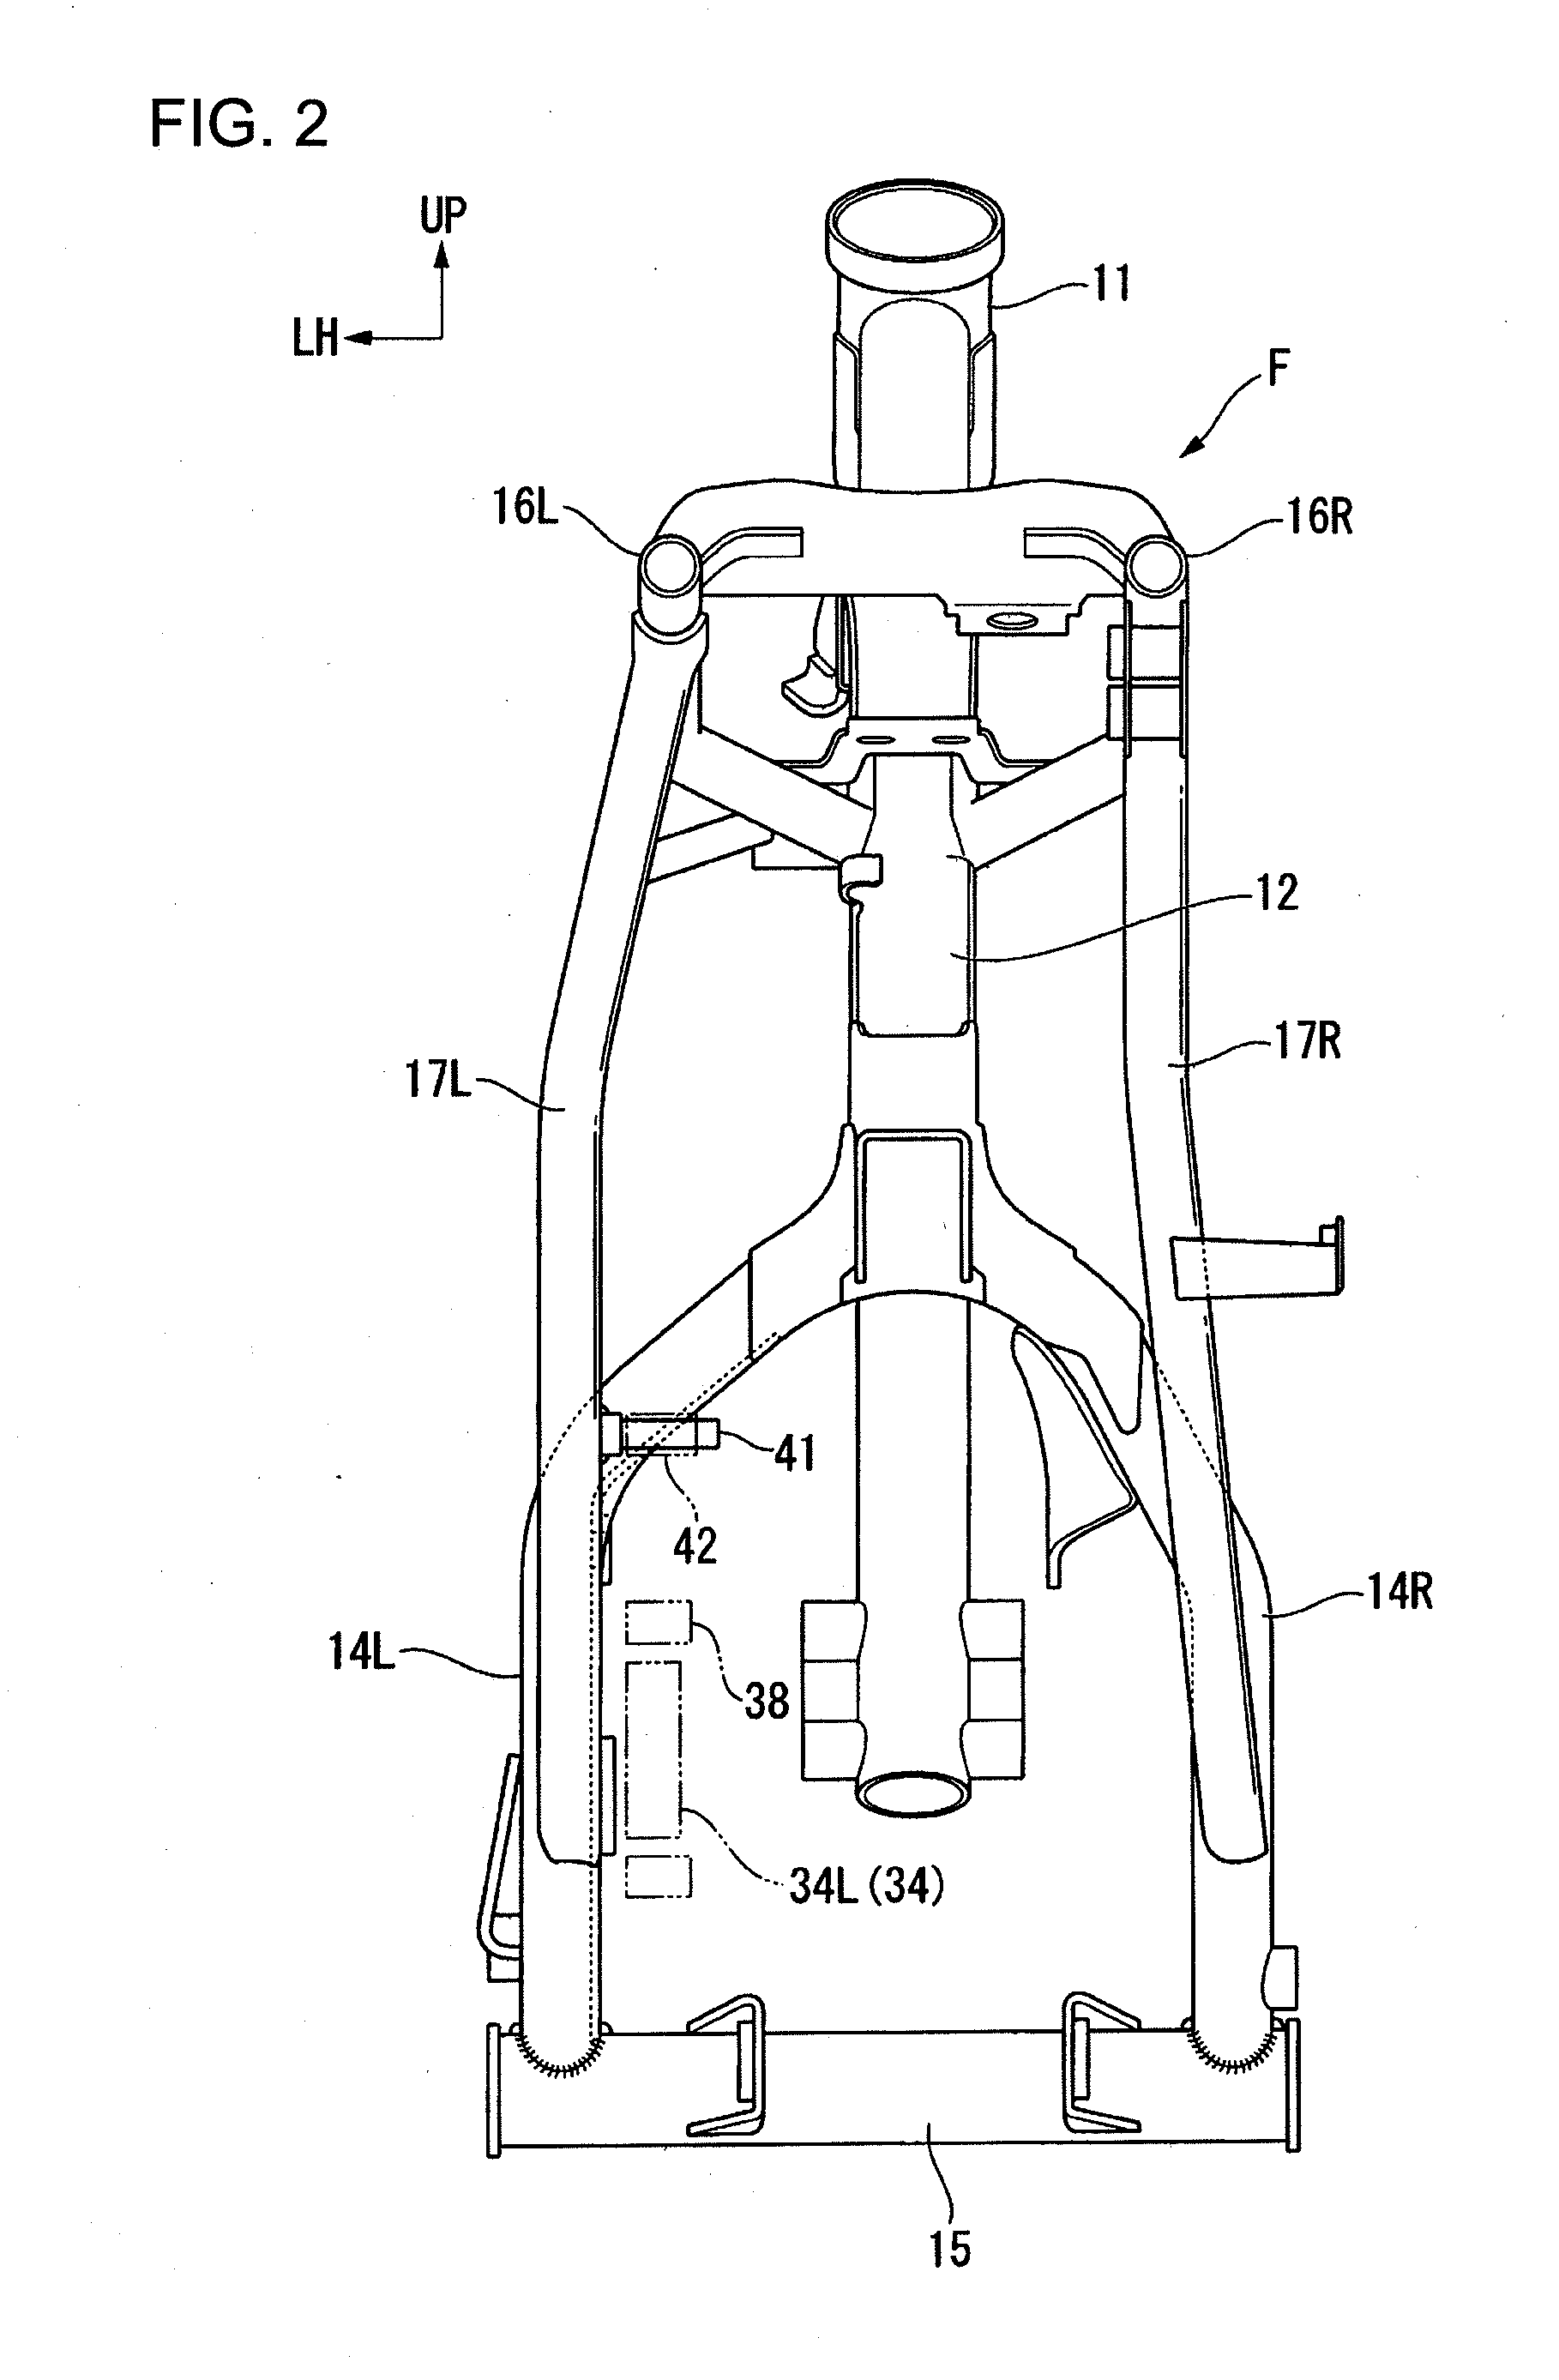 Chain drive for saddle-ride type vehicle